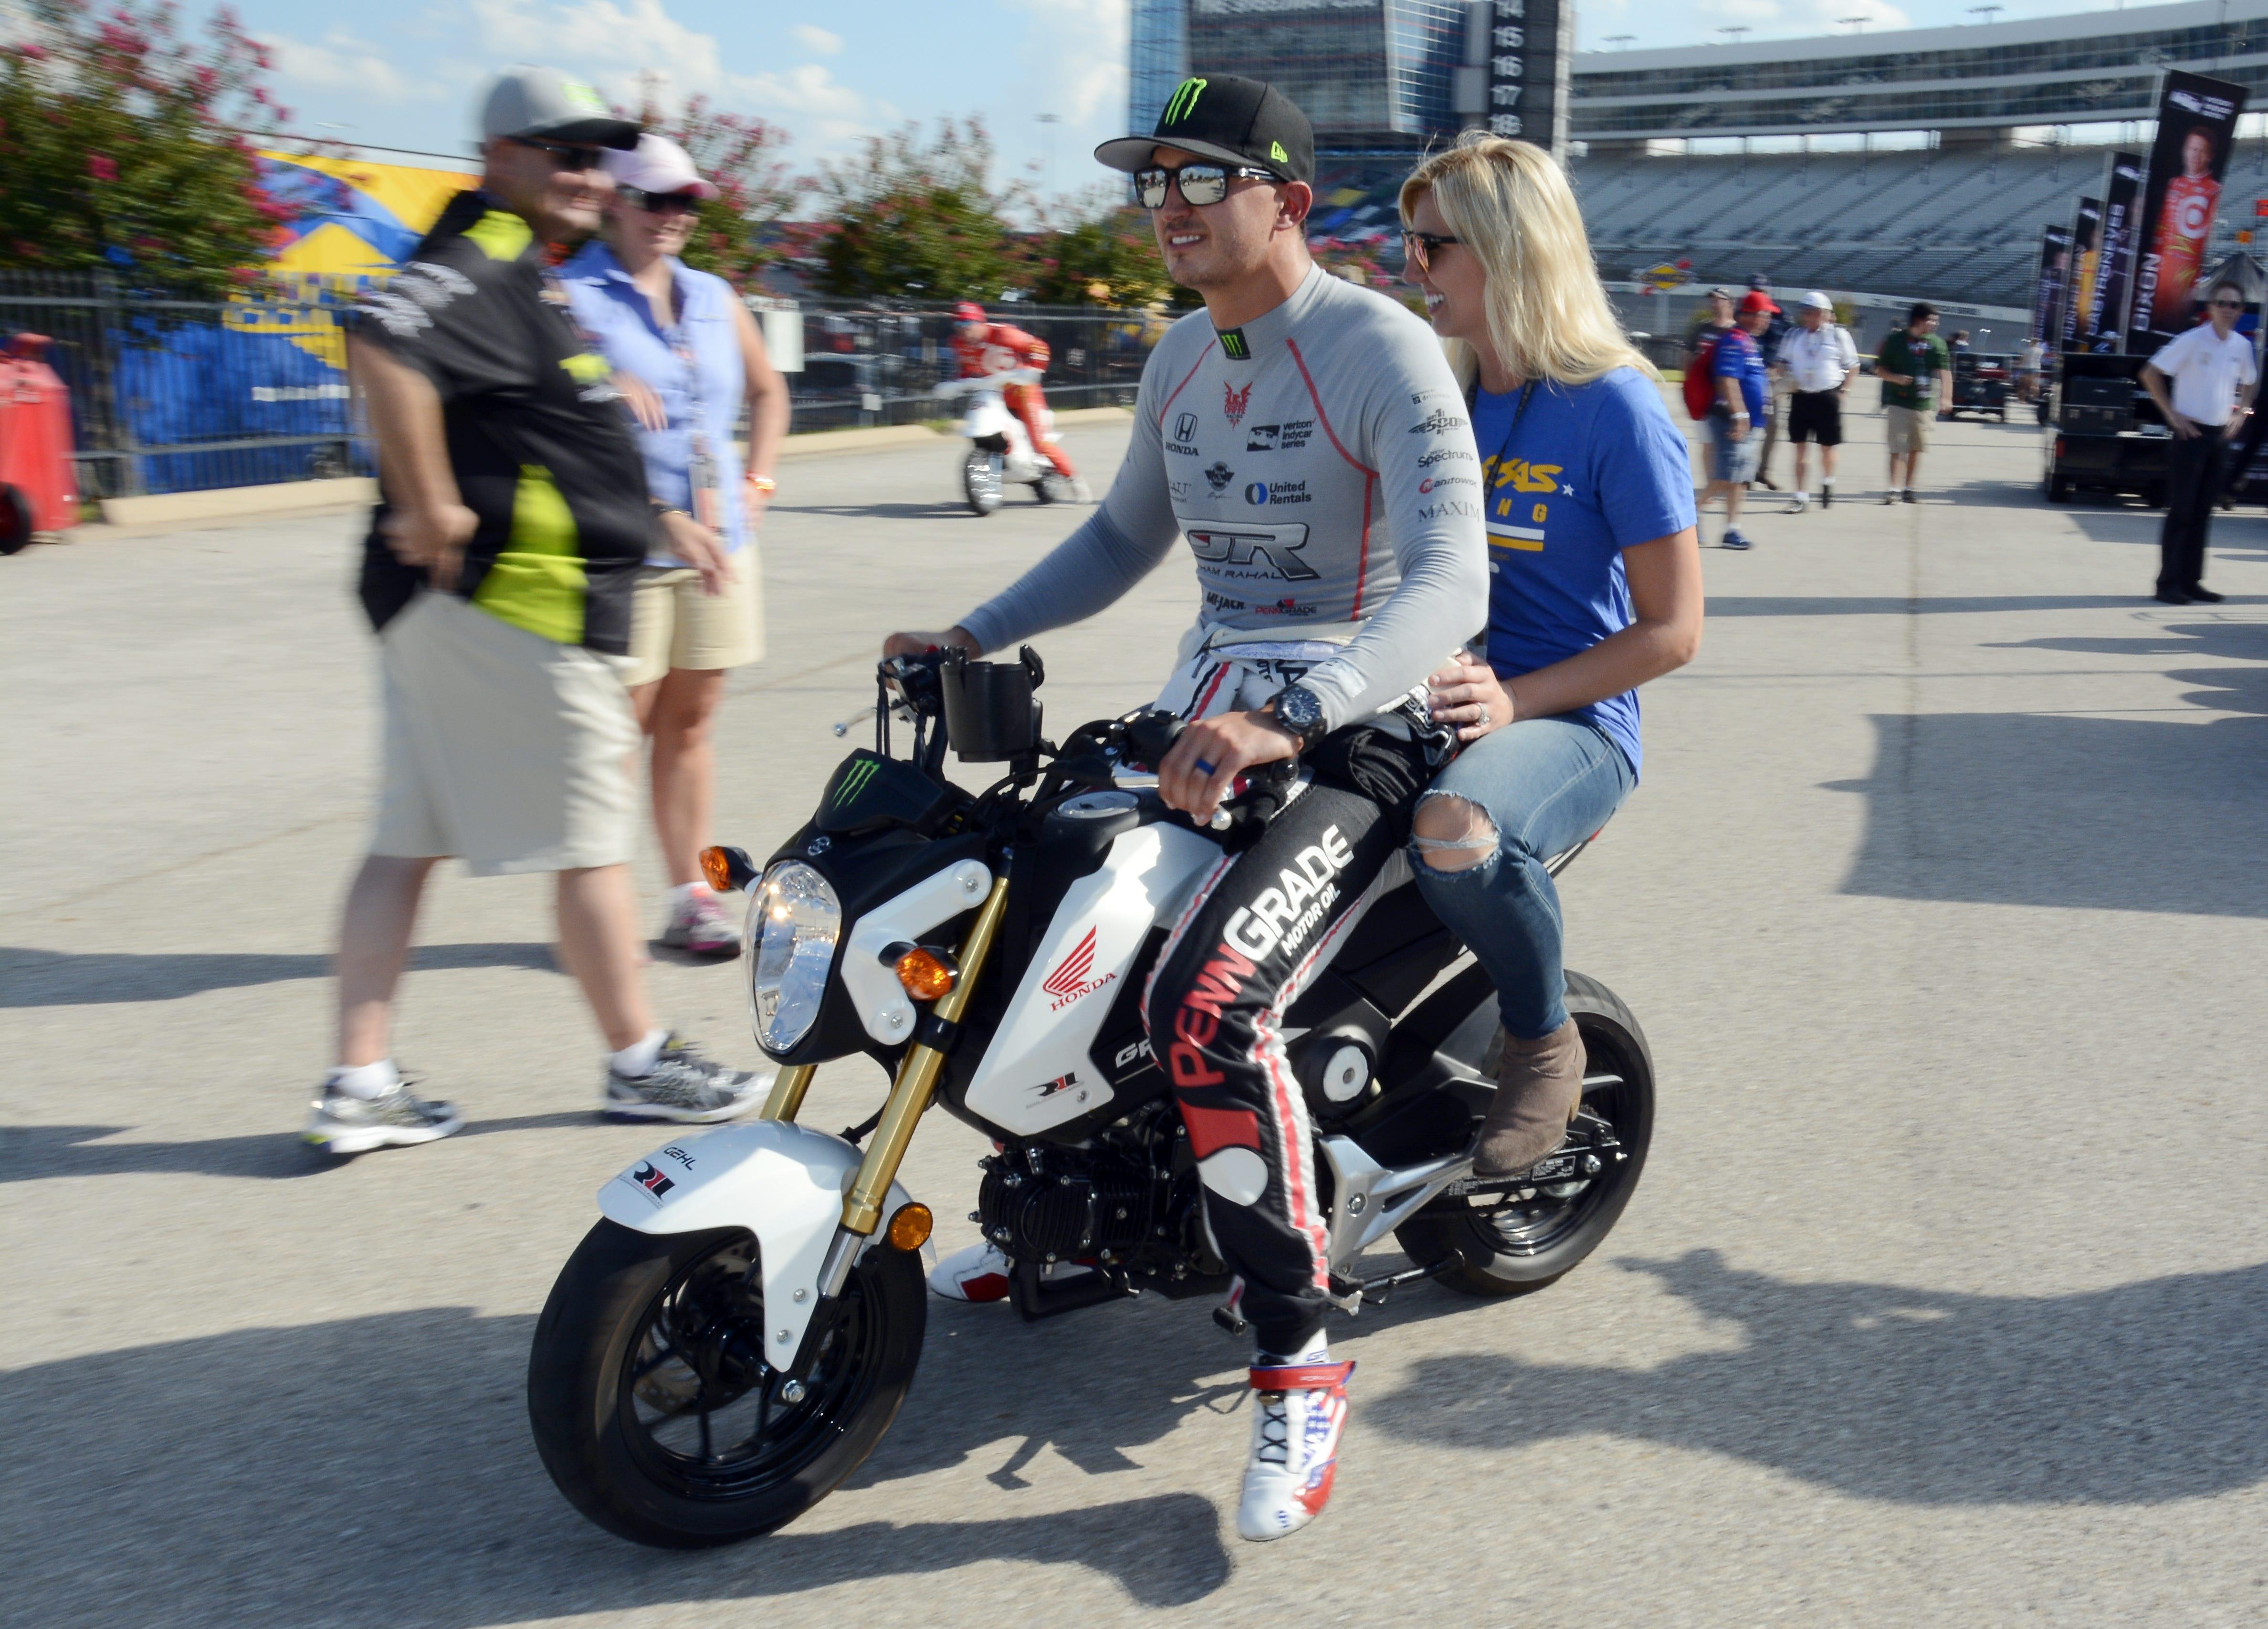 Graham Rahal and his wife, Courtney Force, ride a scooter on pit road in Augusta 2016 at Texas Motor Speedway in Fort Worth, Texas. Force will race May 18-20 in Topeka at the Menards NHRA Nationals at Heartland Motorsports Park, and Rahal is preparing for the Indianapolis 500 on May 27. [File photograph/The Associated Press]